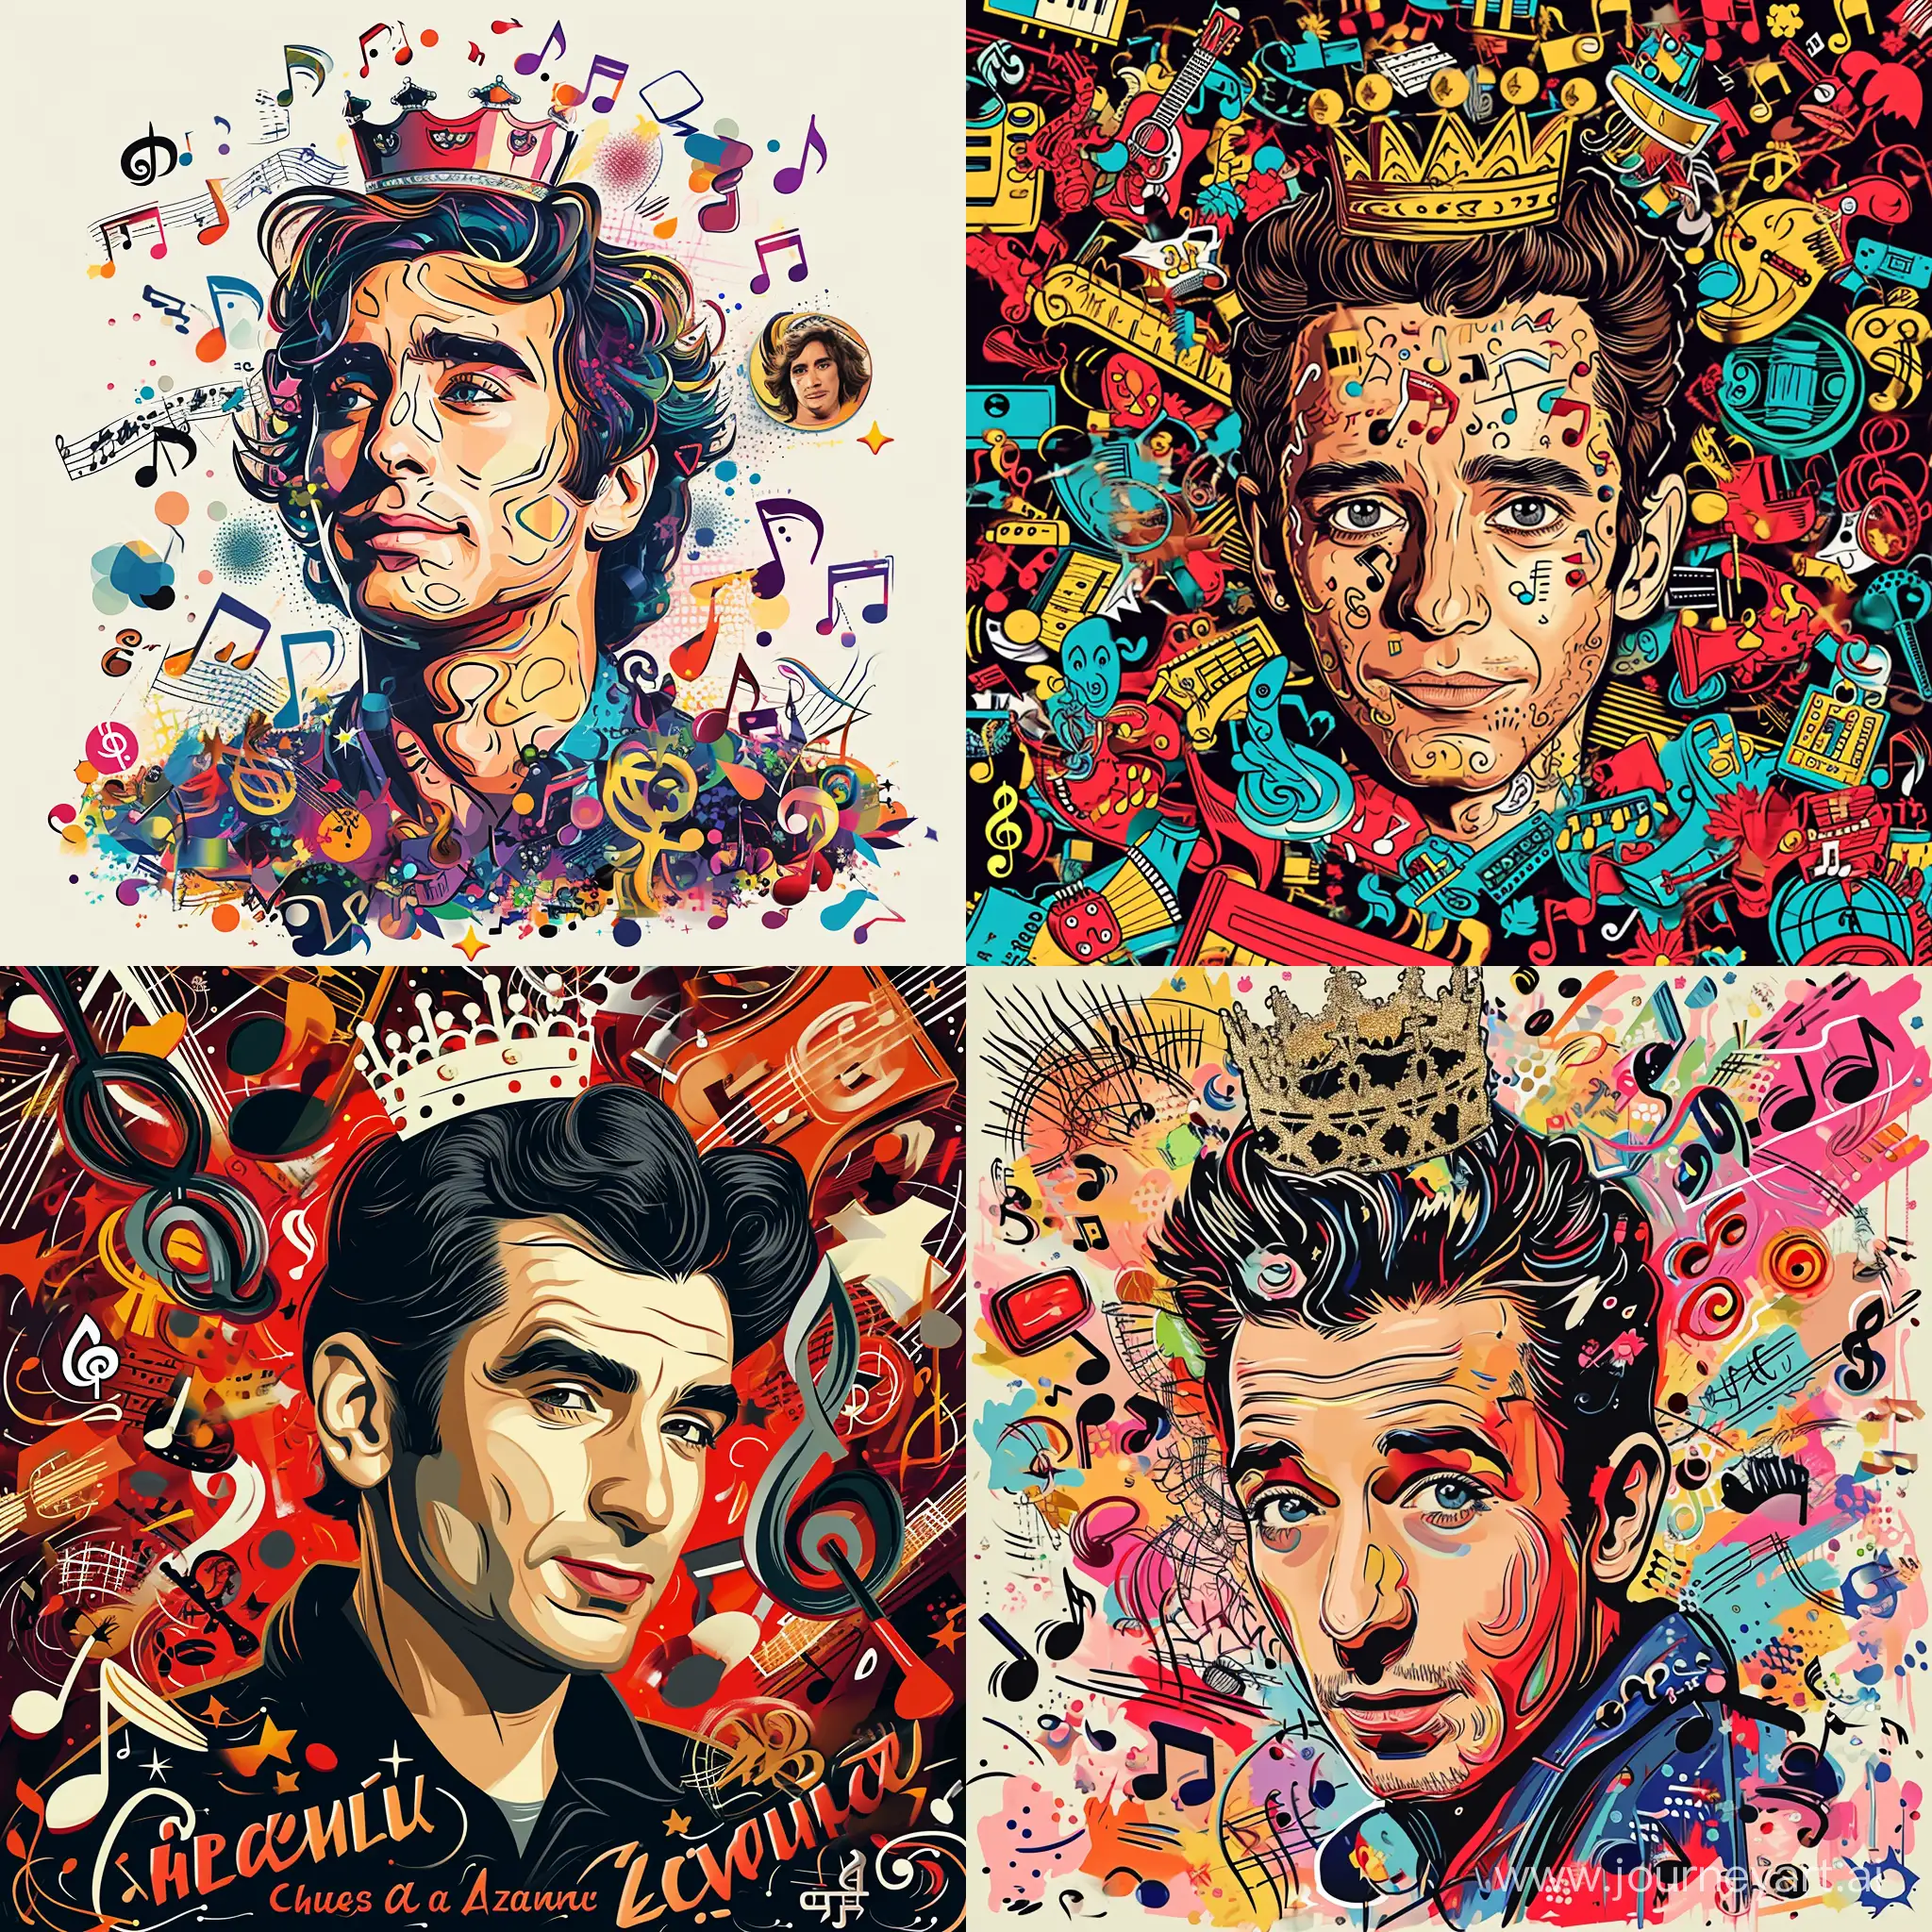 Waist portrait of Charles Aznavour, young, with a crown on his head, surrounded by musical symbols, many details, complex colors, caricature, pop art style